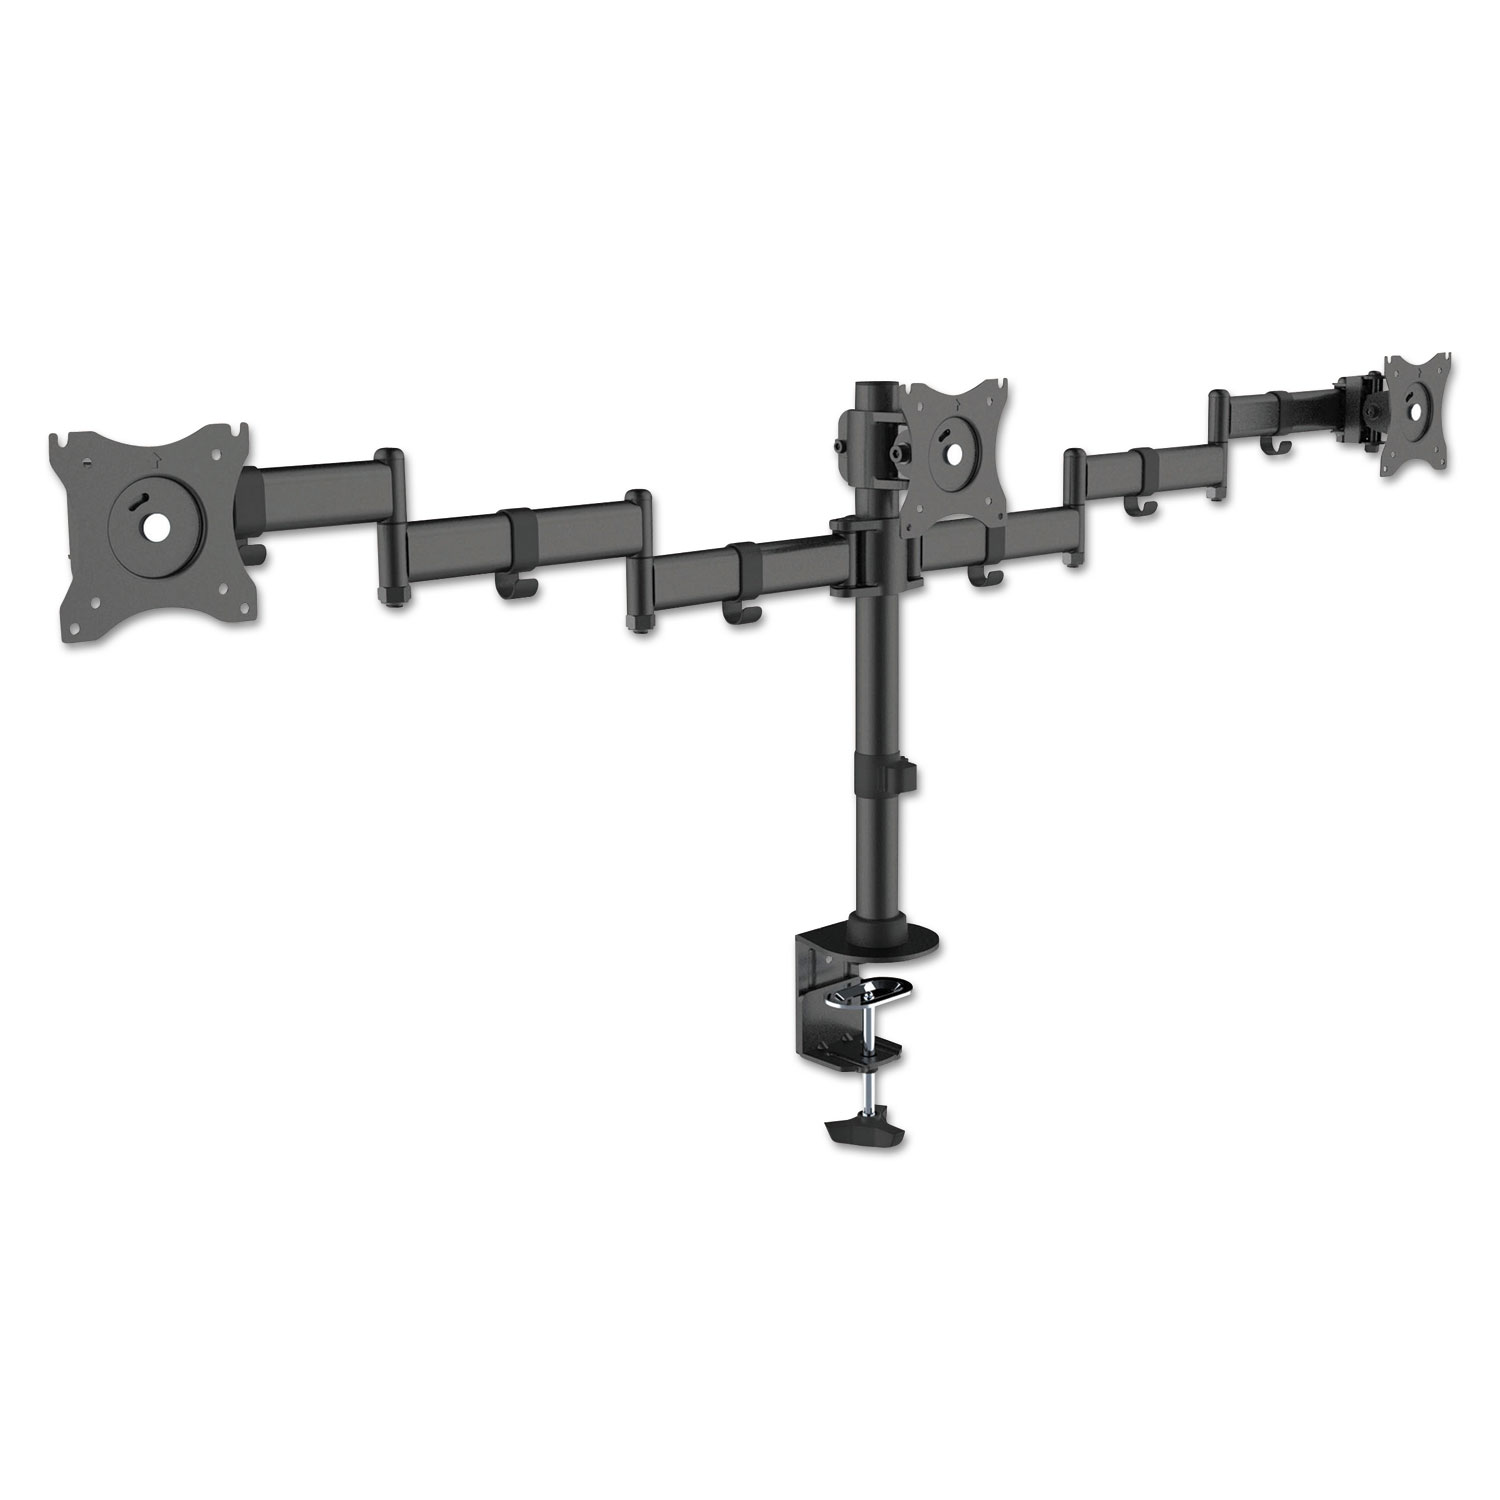 Articulating Multiple Monitor Arms for Three Monitors, Desk Mount